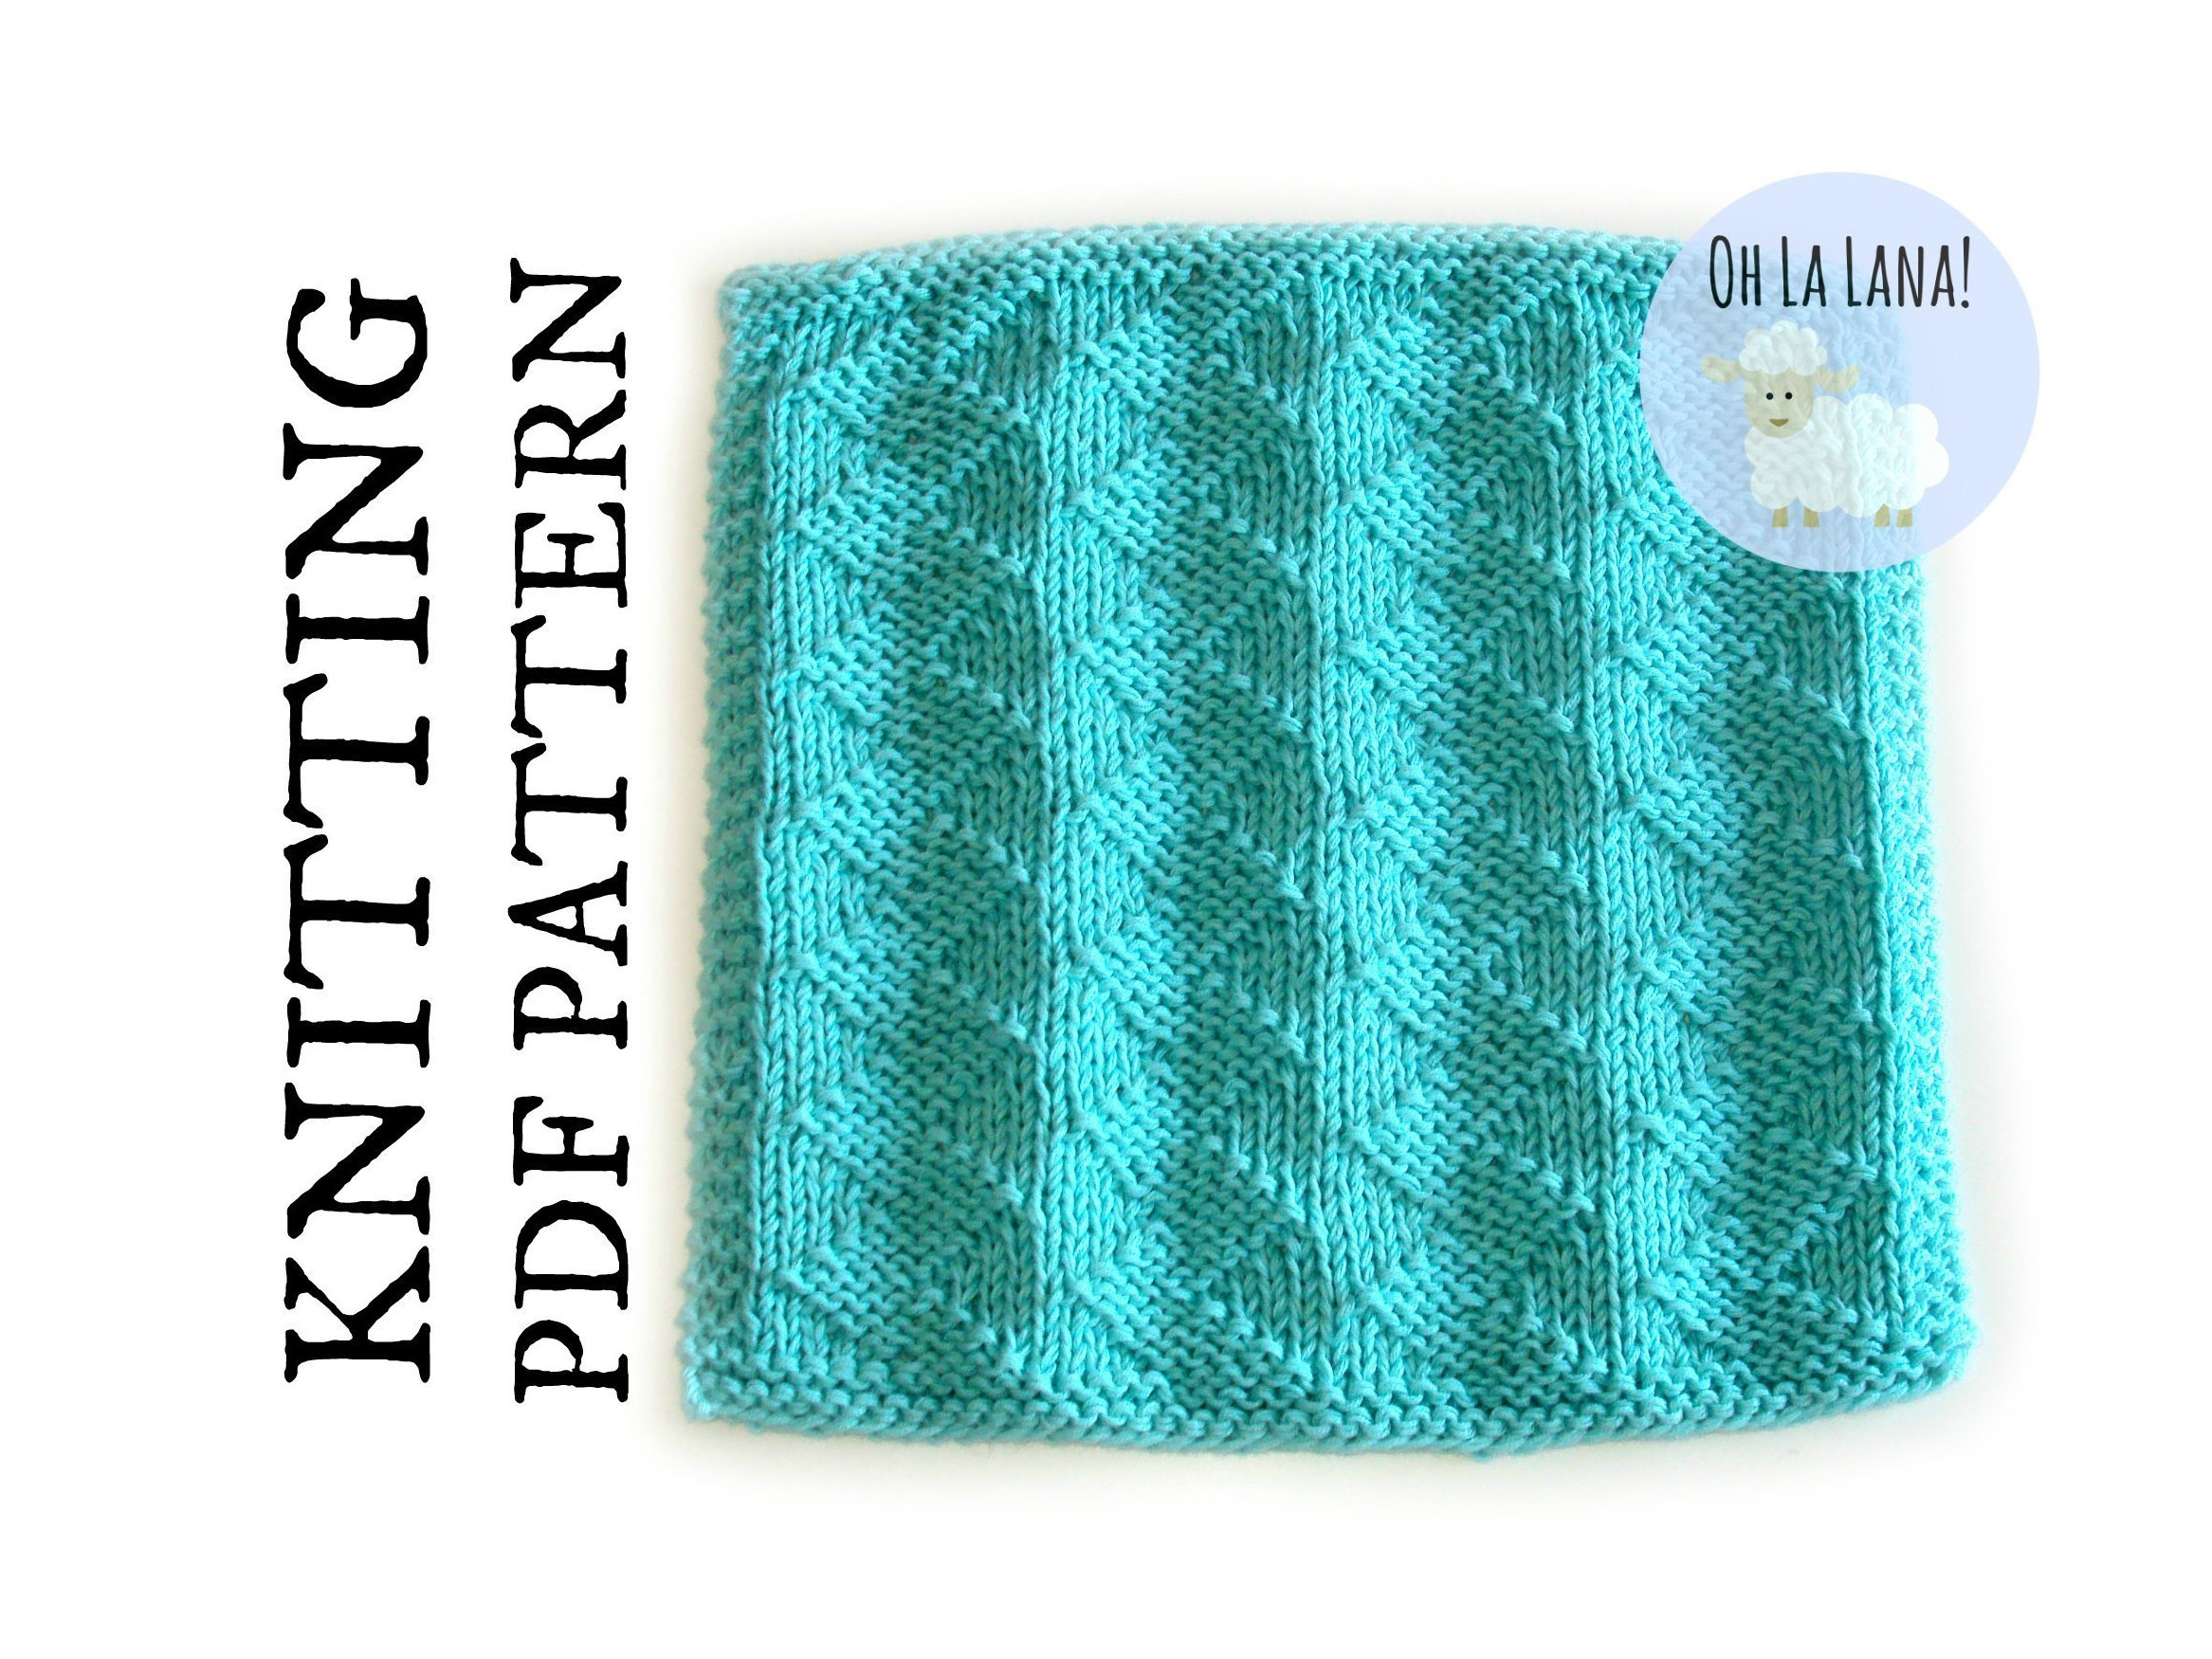 Easy Dishcloth Knit Pattern Easy Knitting Pattern Zig Zag Dishcloth Easy Washcloth Knitting Pattern Knit And Purl Beginner Knitting Pattern Instant Download